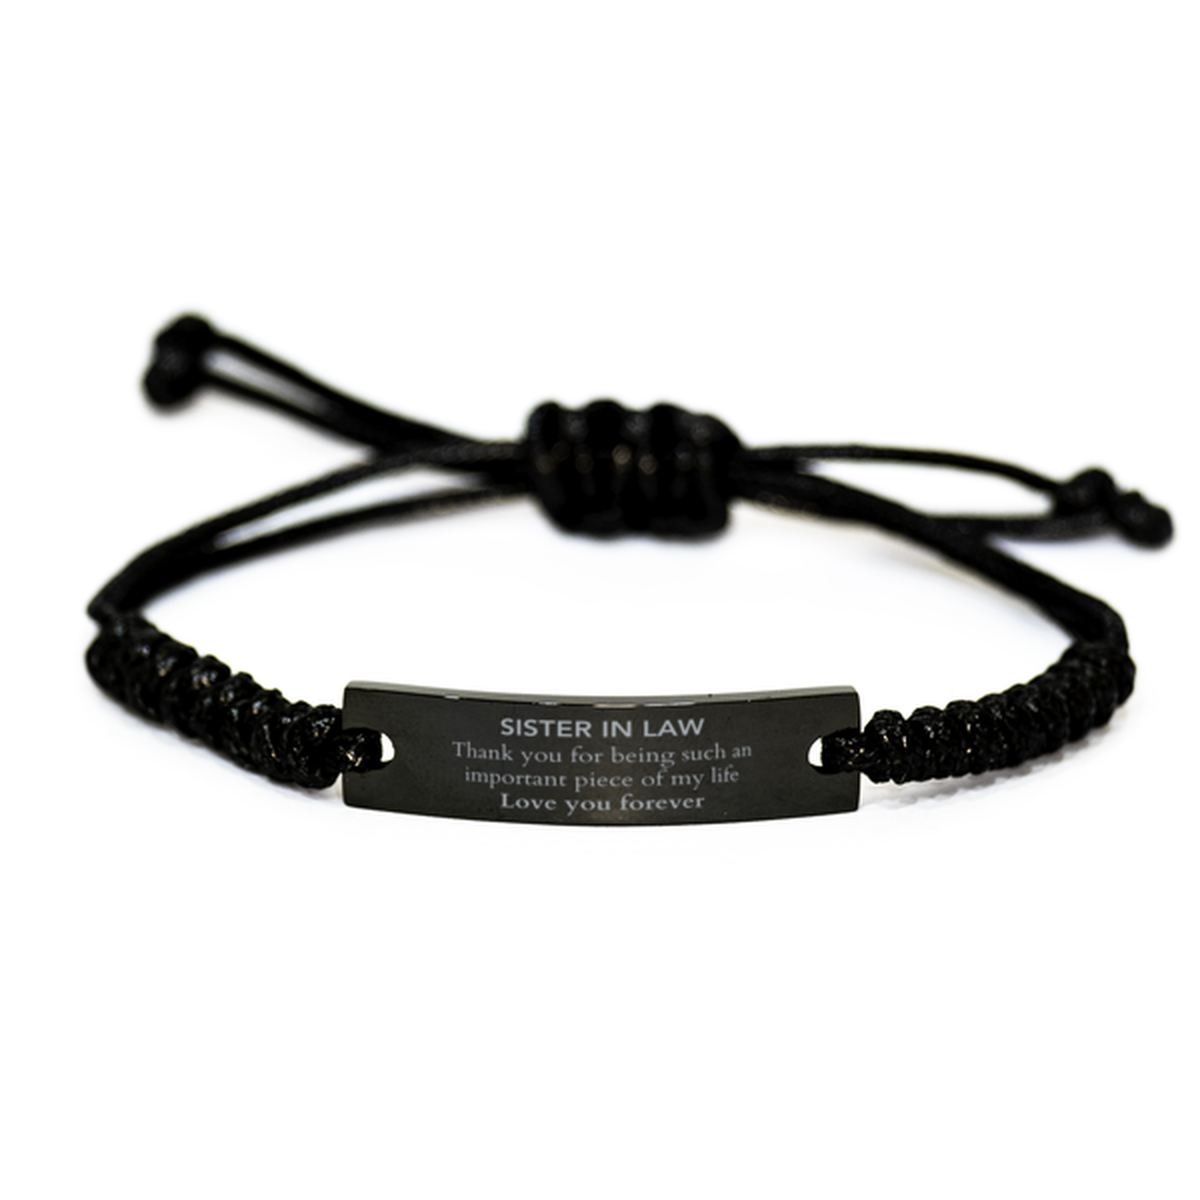 Appropriate Sister In Law Black Rope Bracelet Epic Birthday Gifts for Sister In Law Thank you for being such an important piece of my life Sister In Law Christmas Mothers Fathers Day